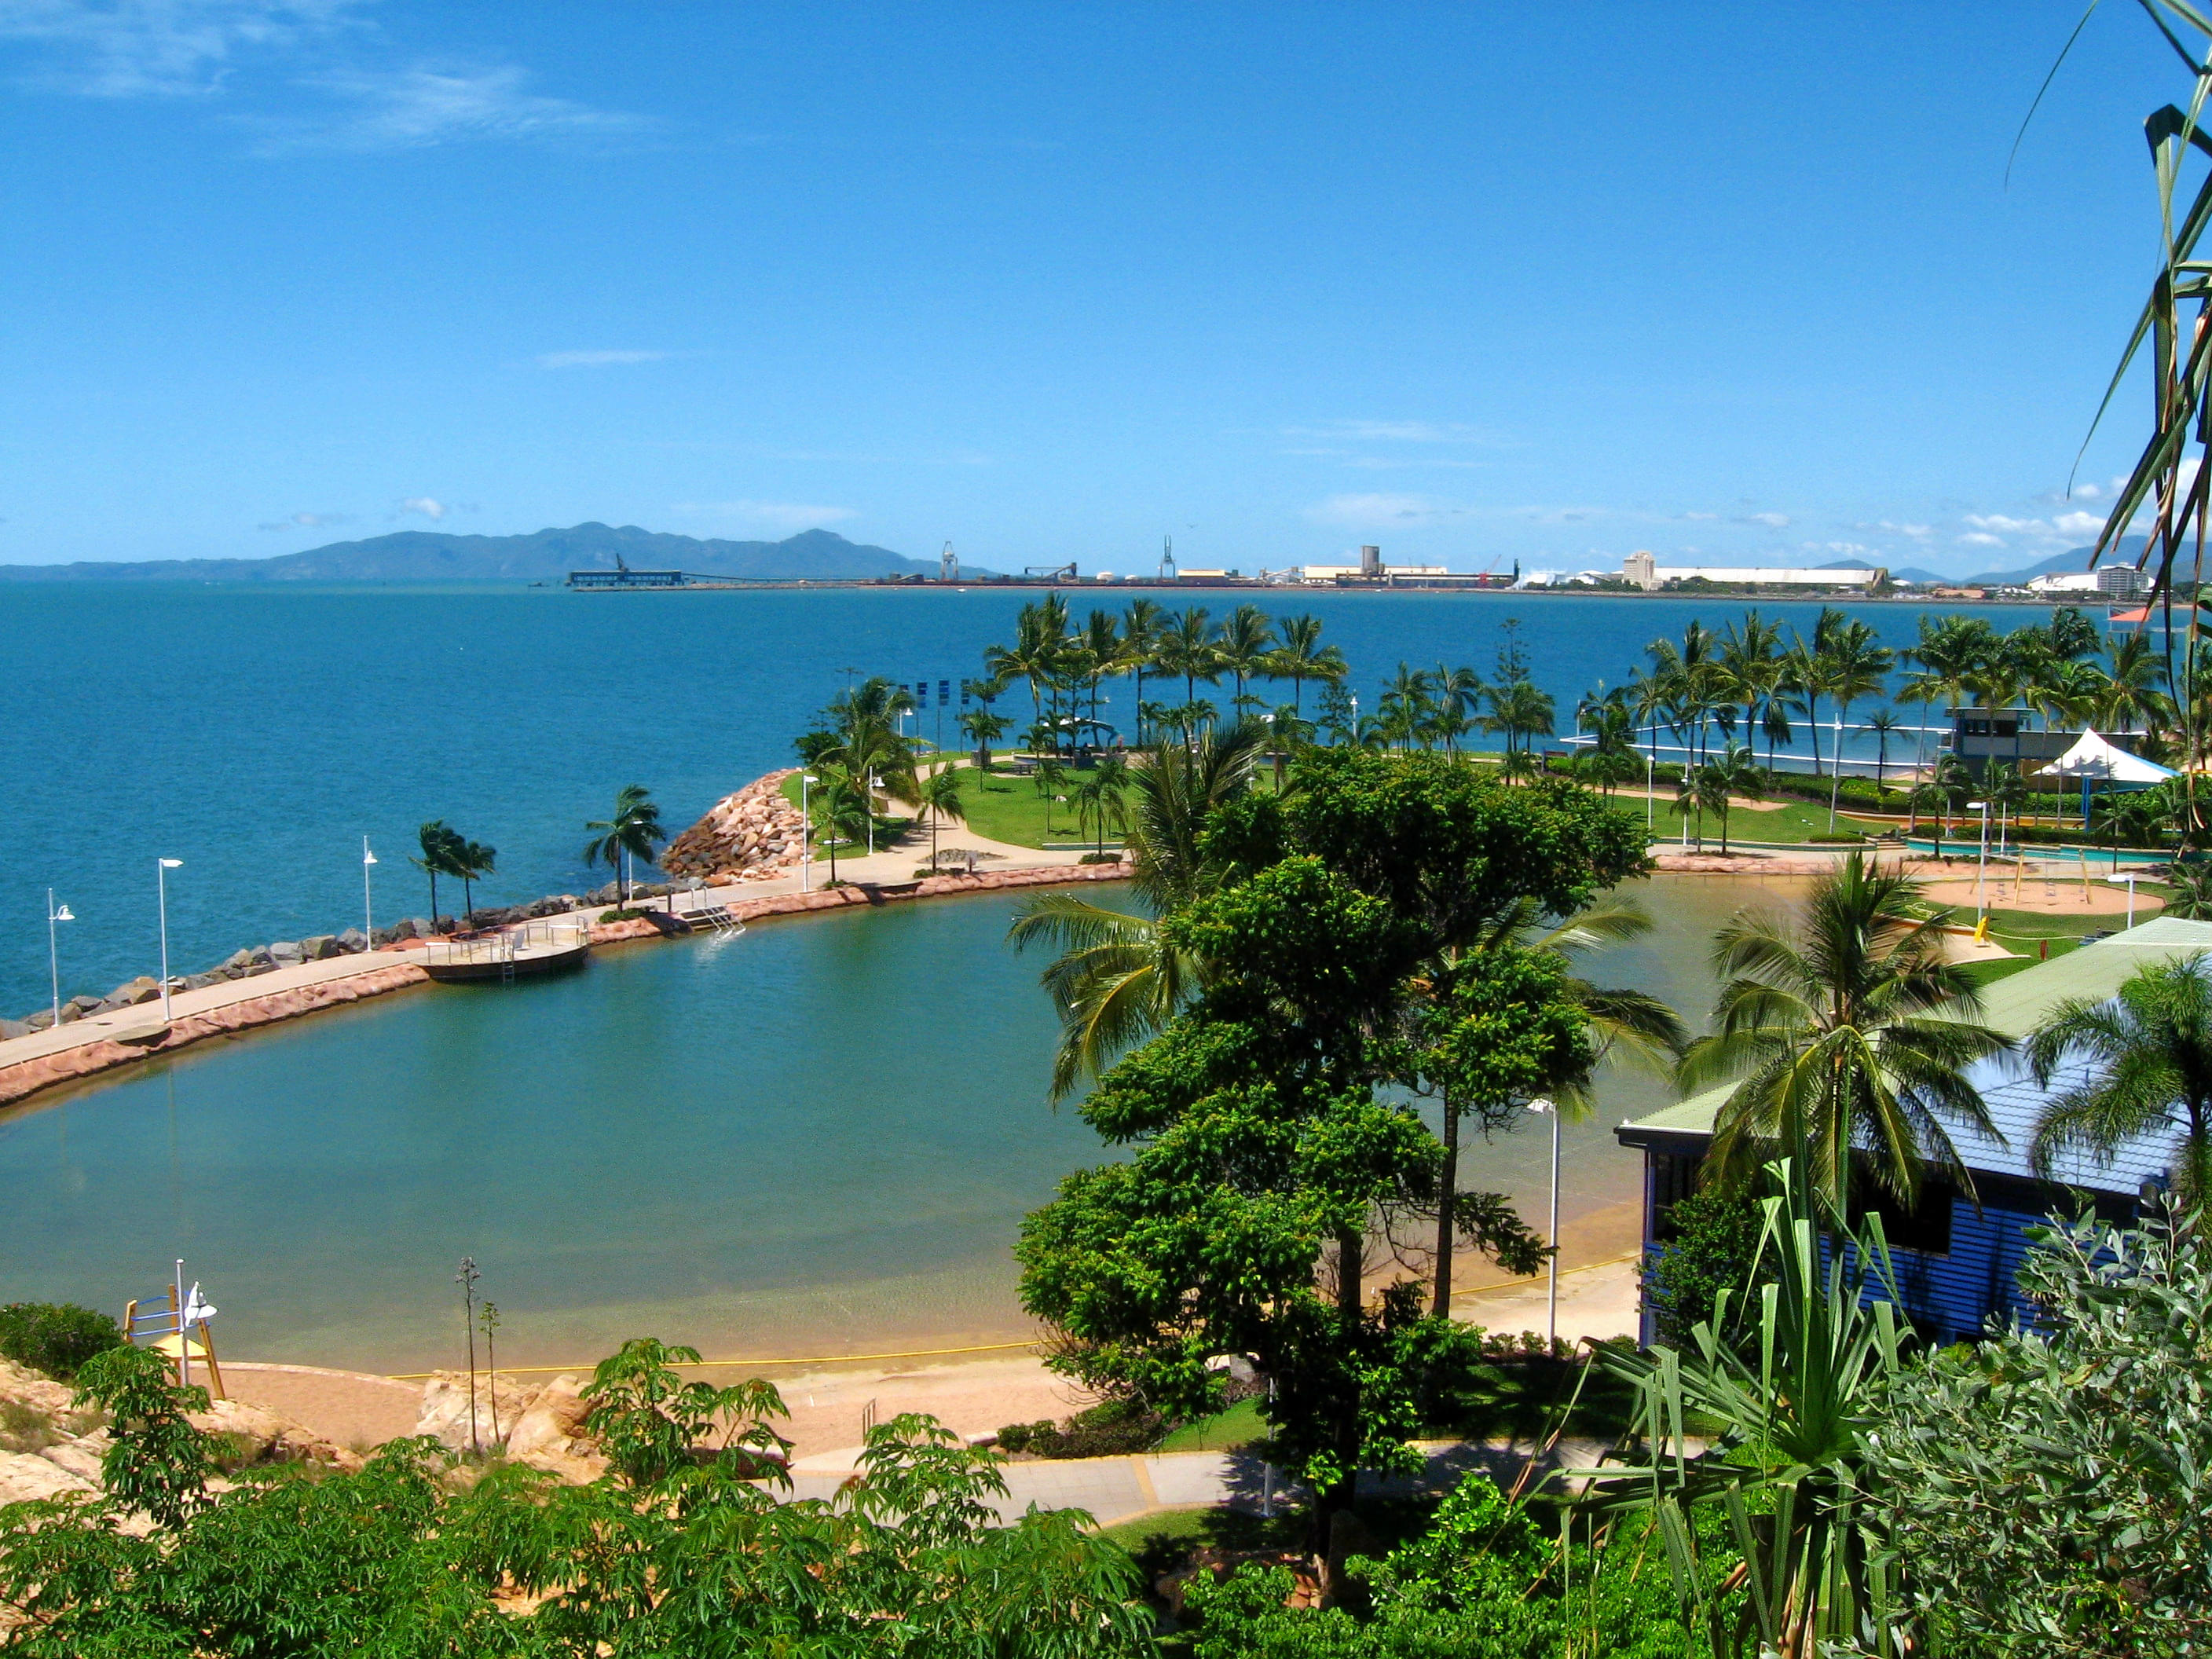 Townsville Overview